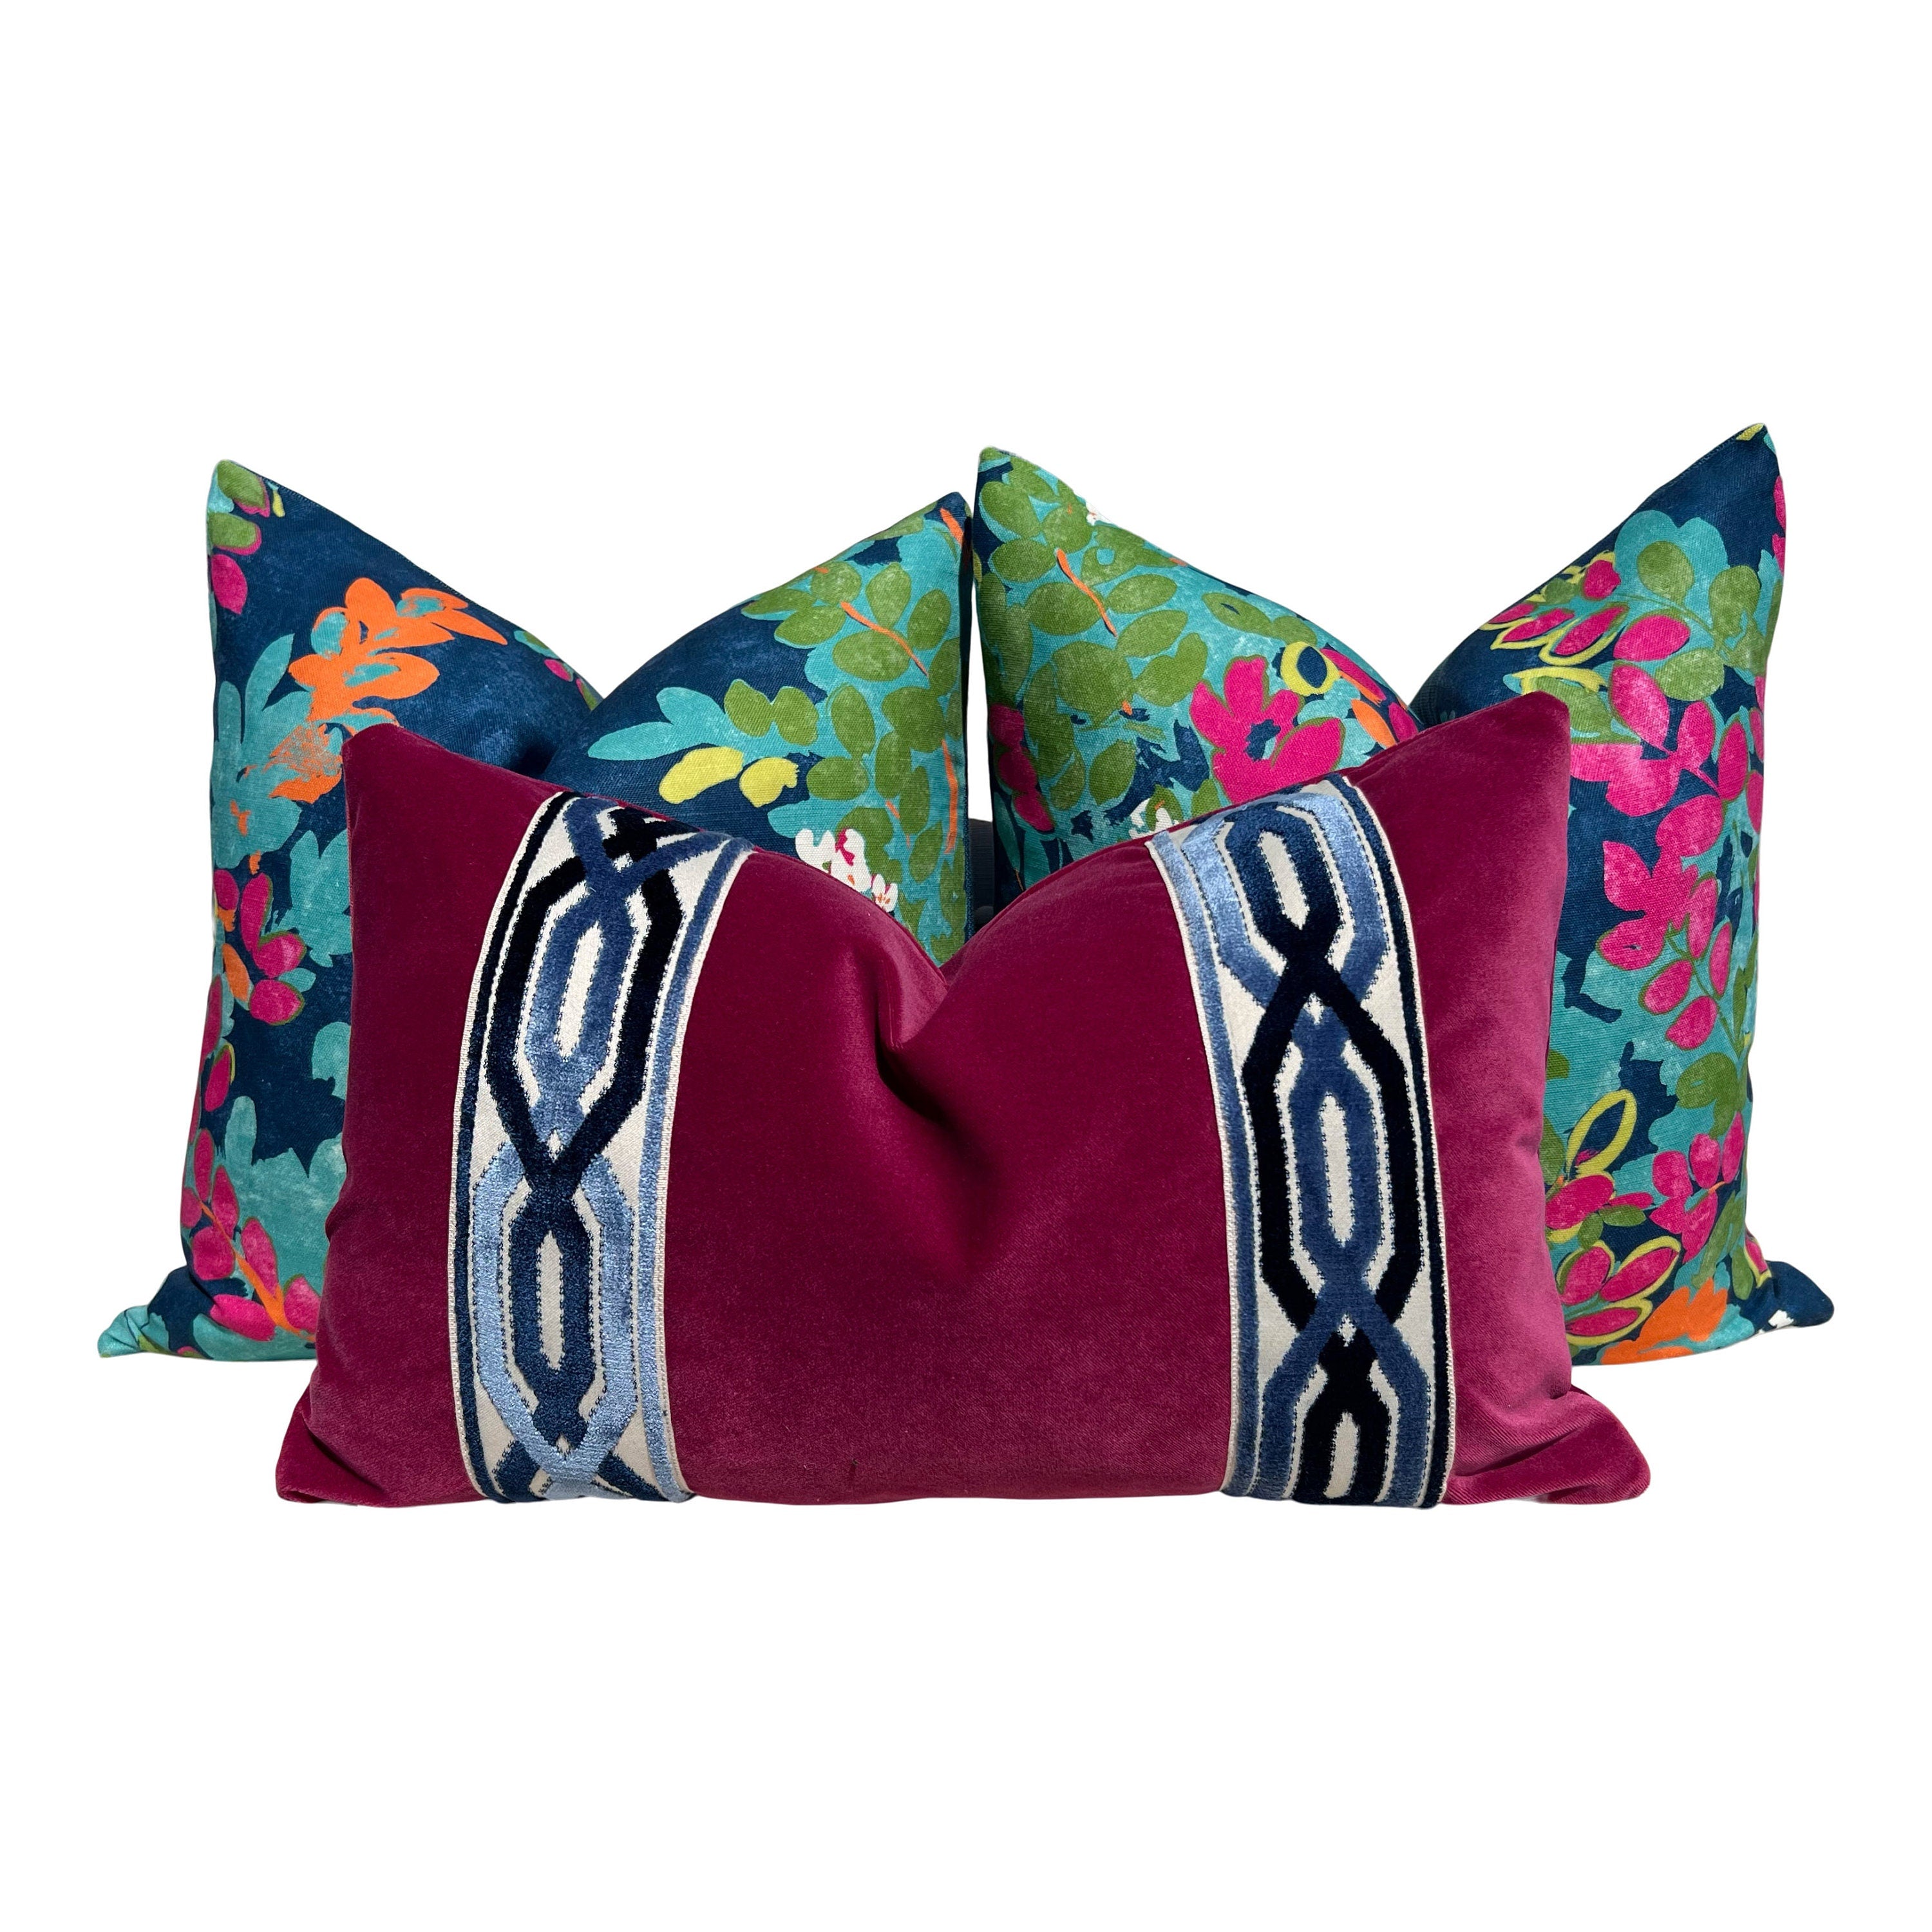 Thibaut Central Park Pillow in Navy and Fuchsia. Designer Pillow Cover, Accent lumbar pillow, High End Floral Pillow, Euro Sham Floral Case